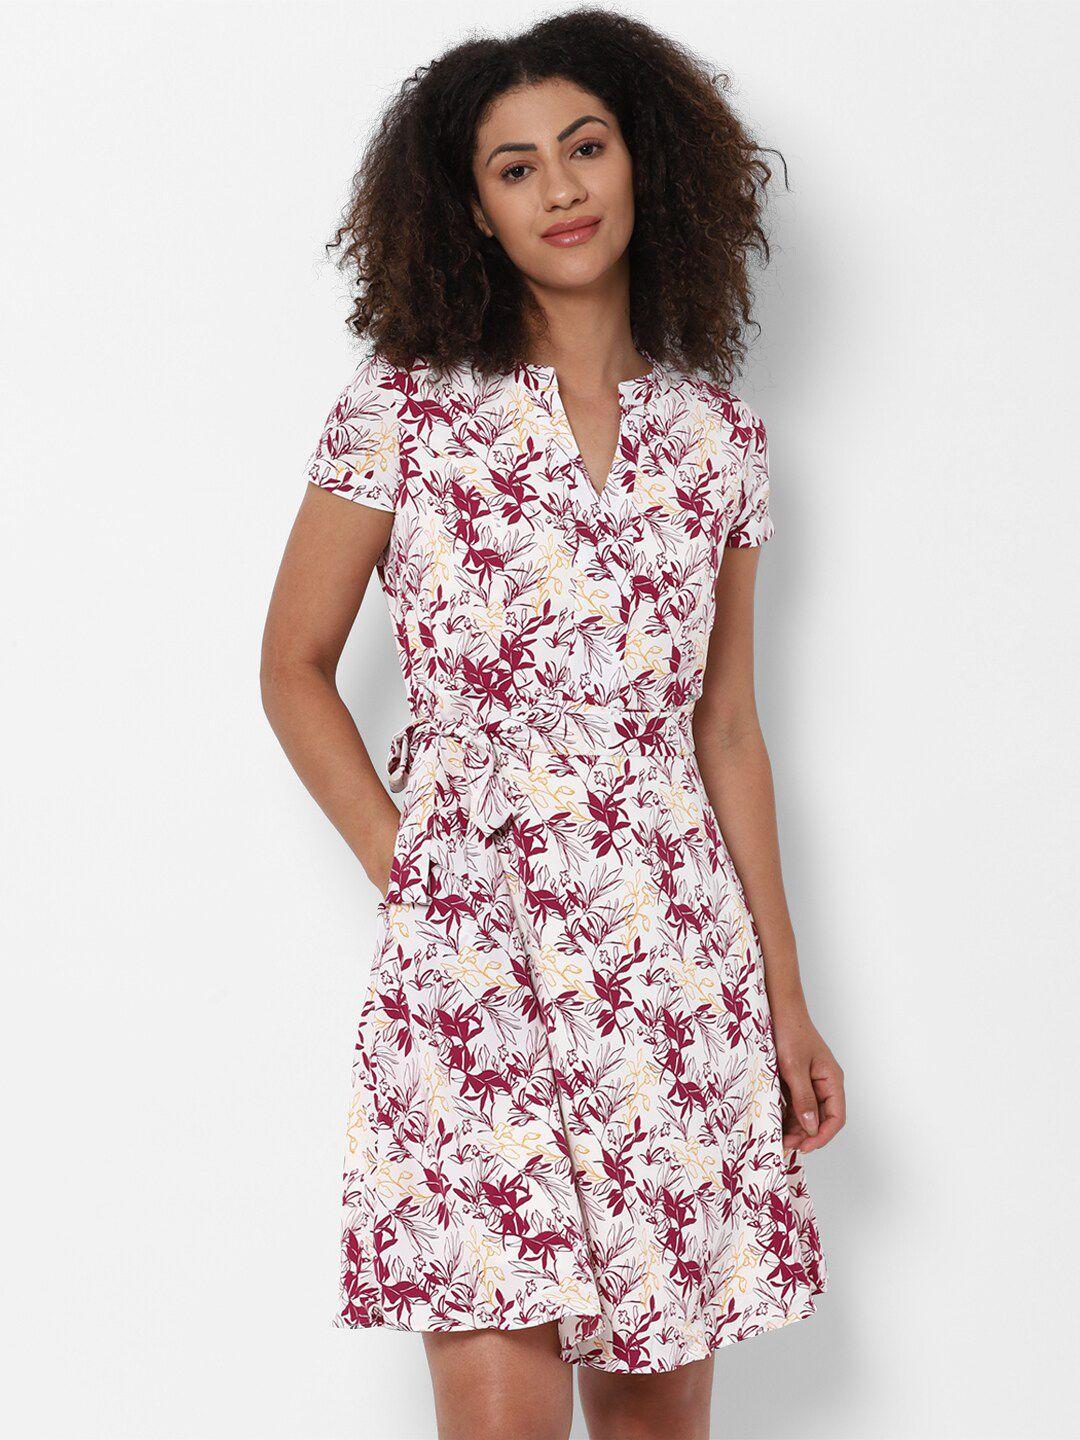 allen solly woman white & maroon floral printed dress